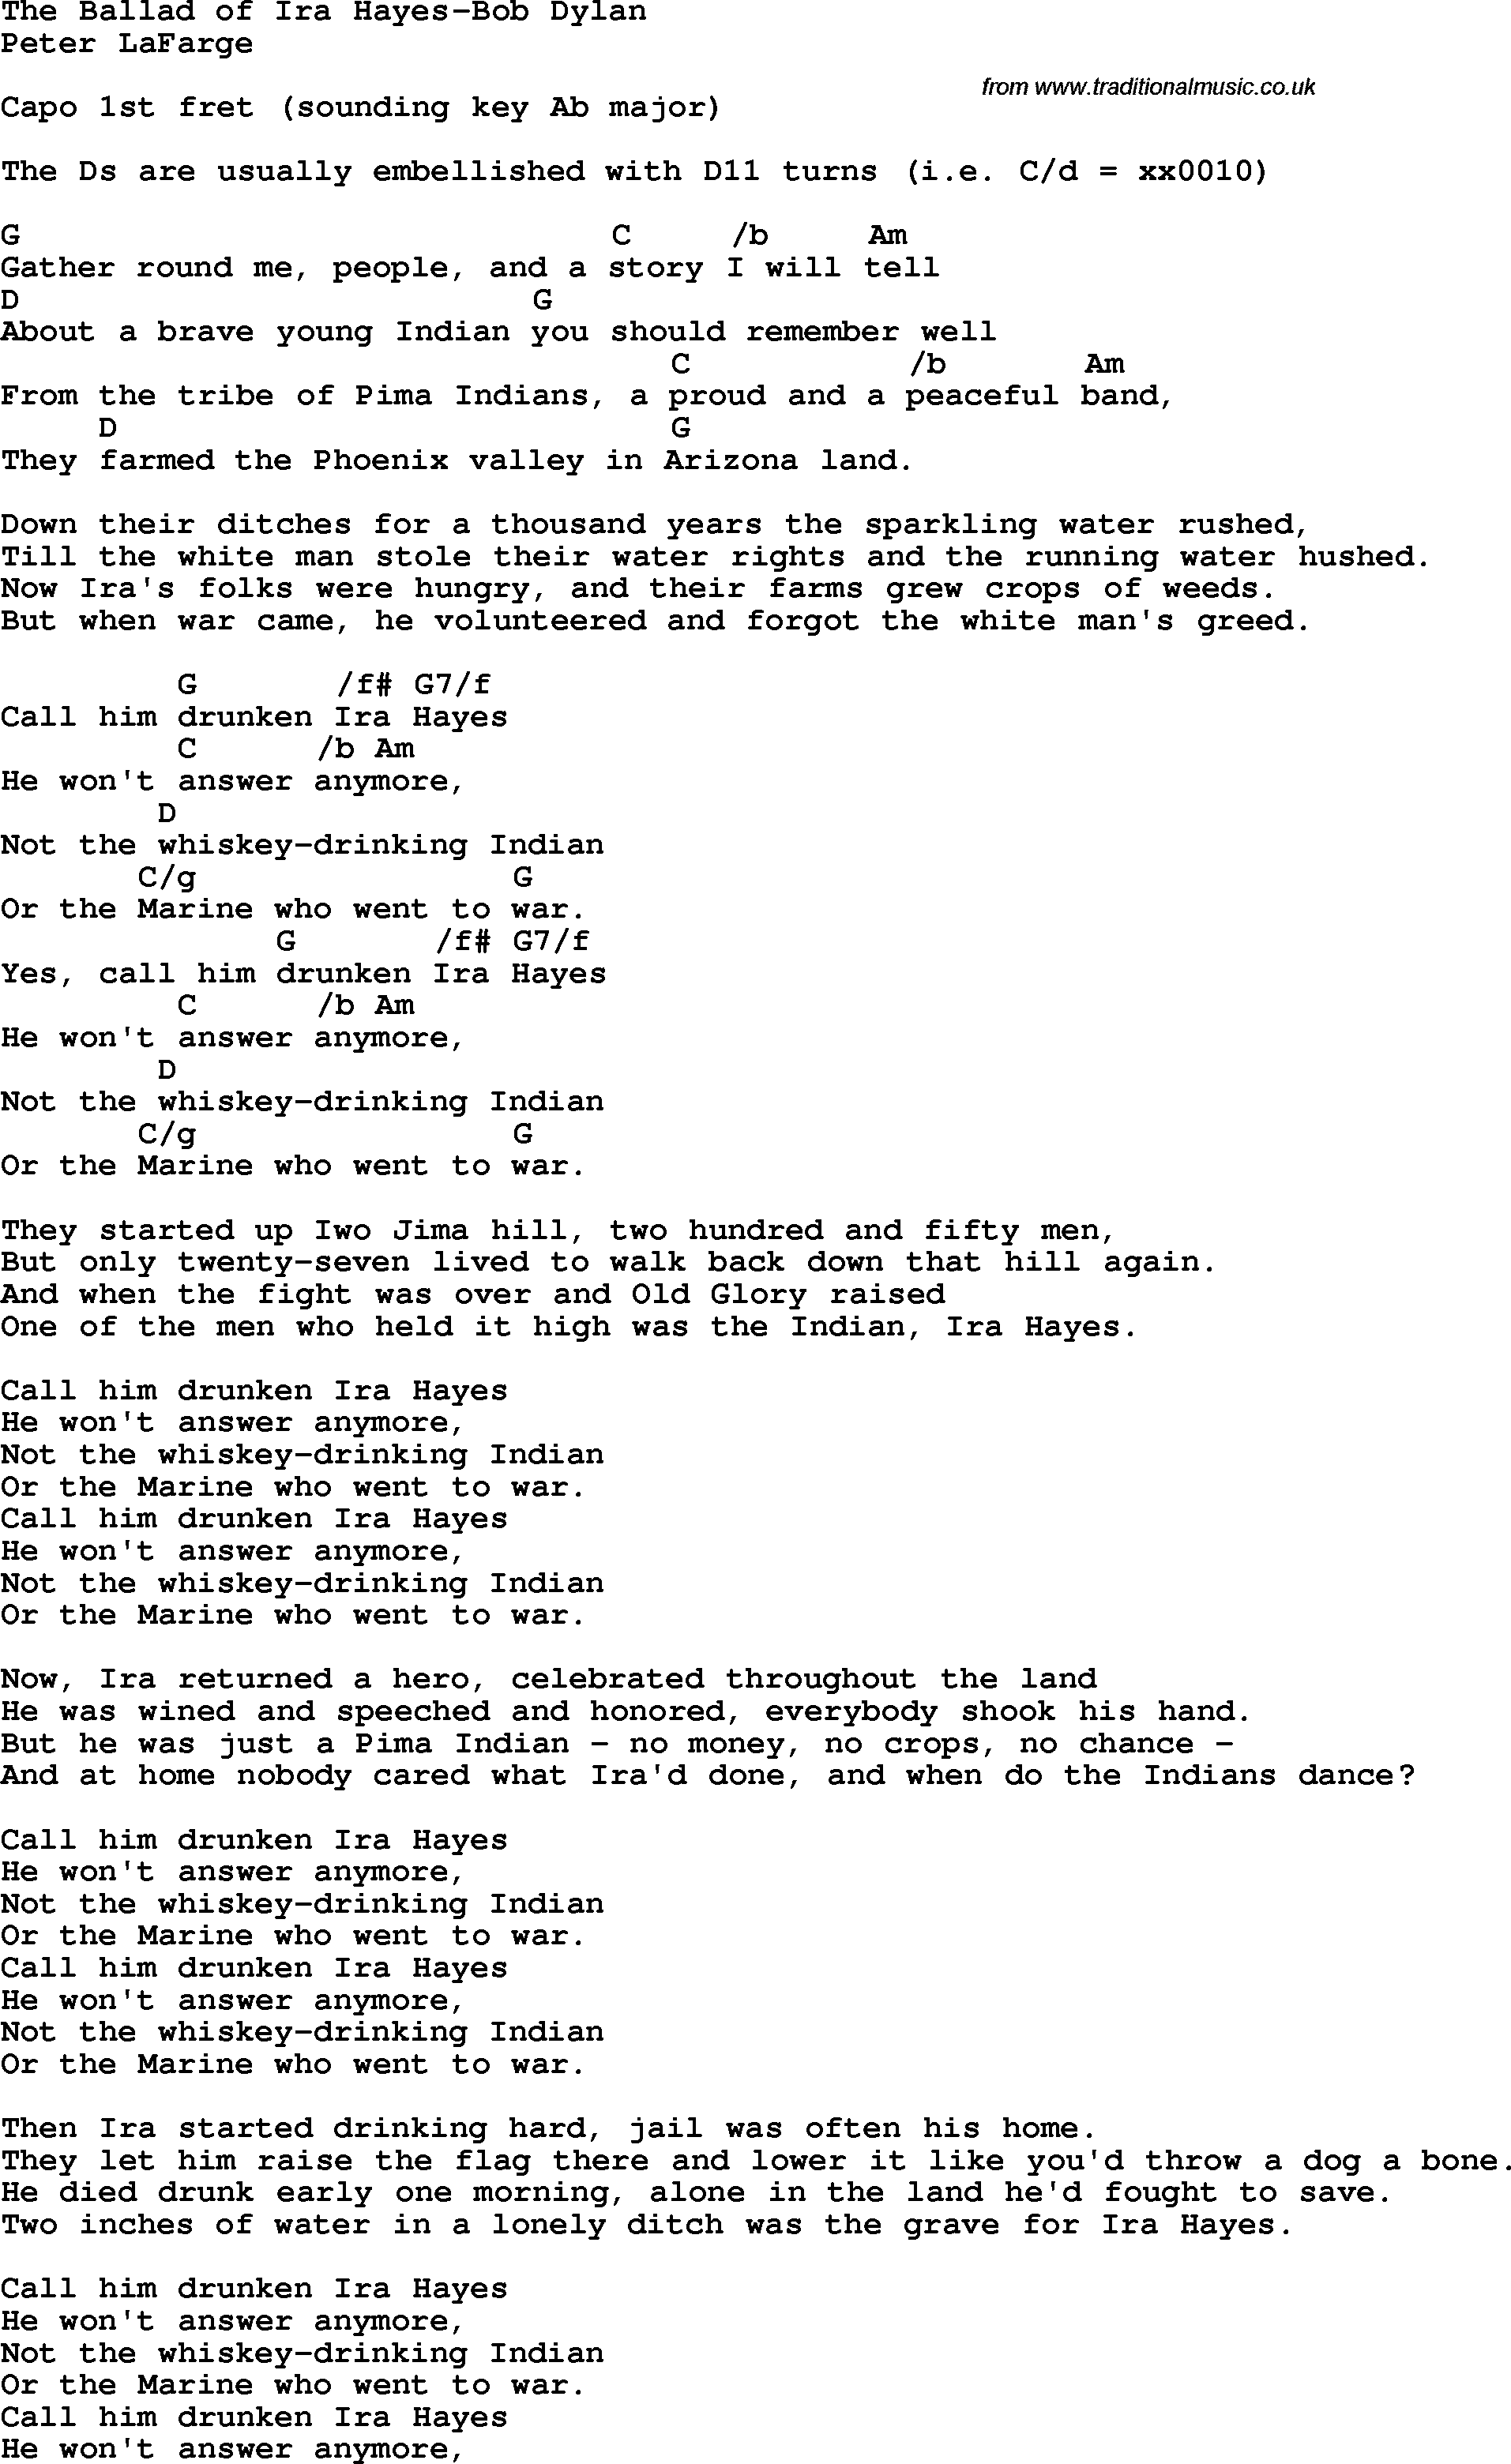 Protest Song The Ballad Of Ira Hayes-Bob Dylan lyrics and chords